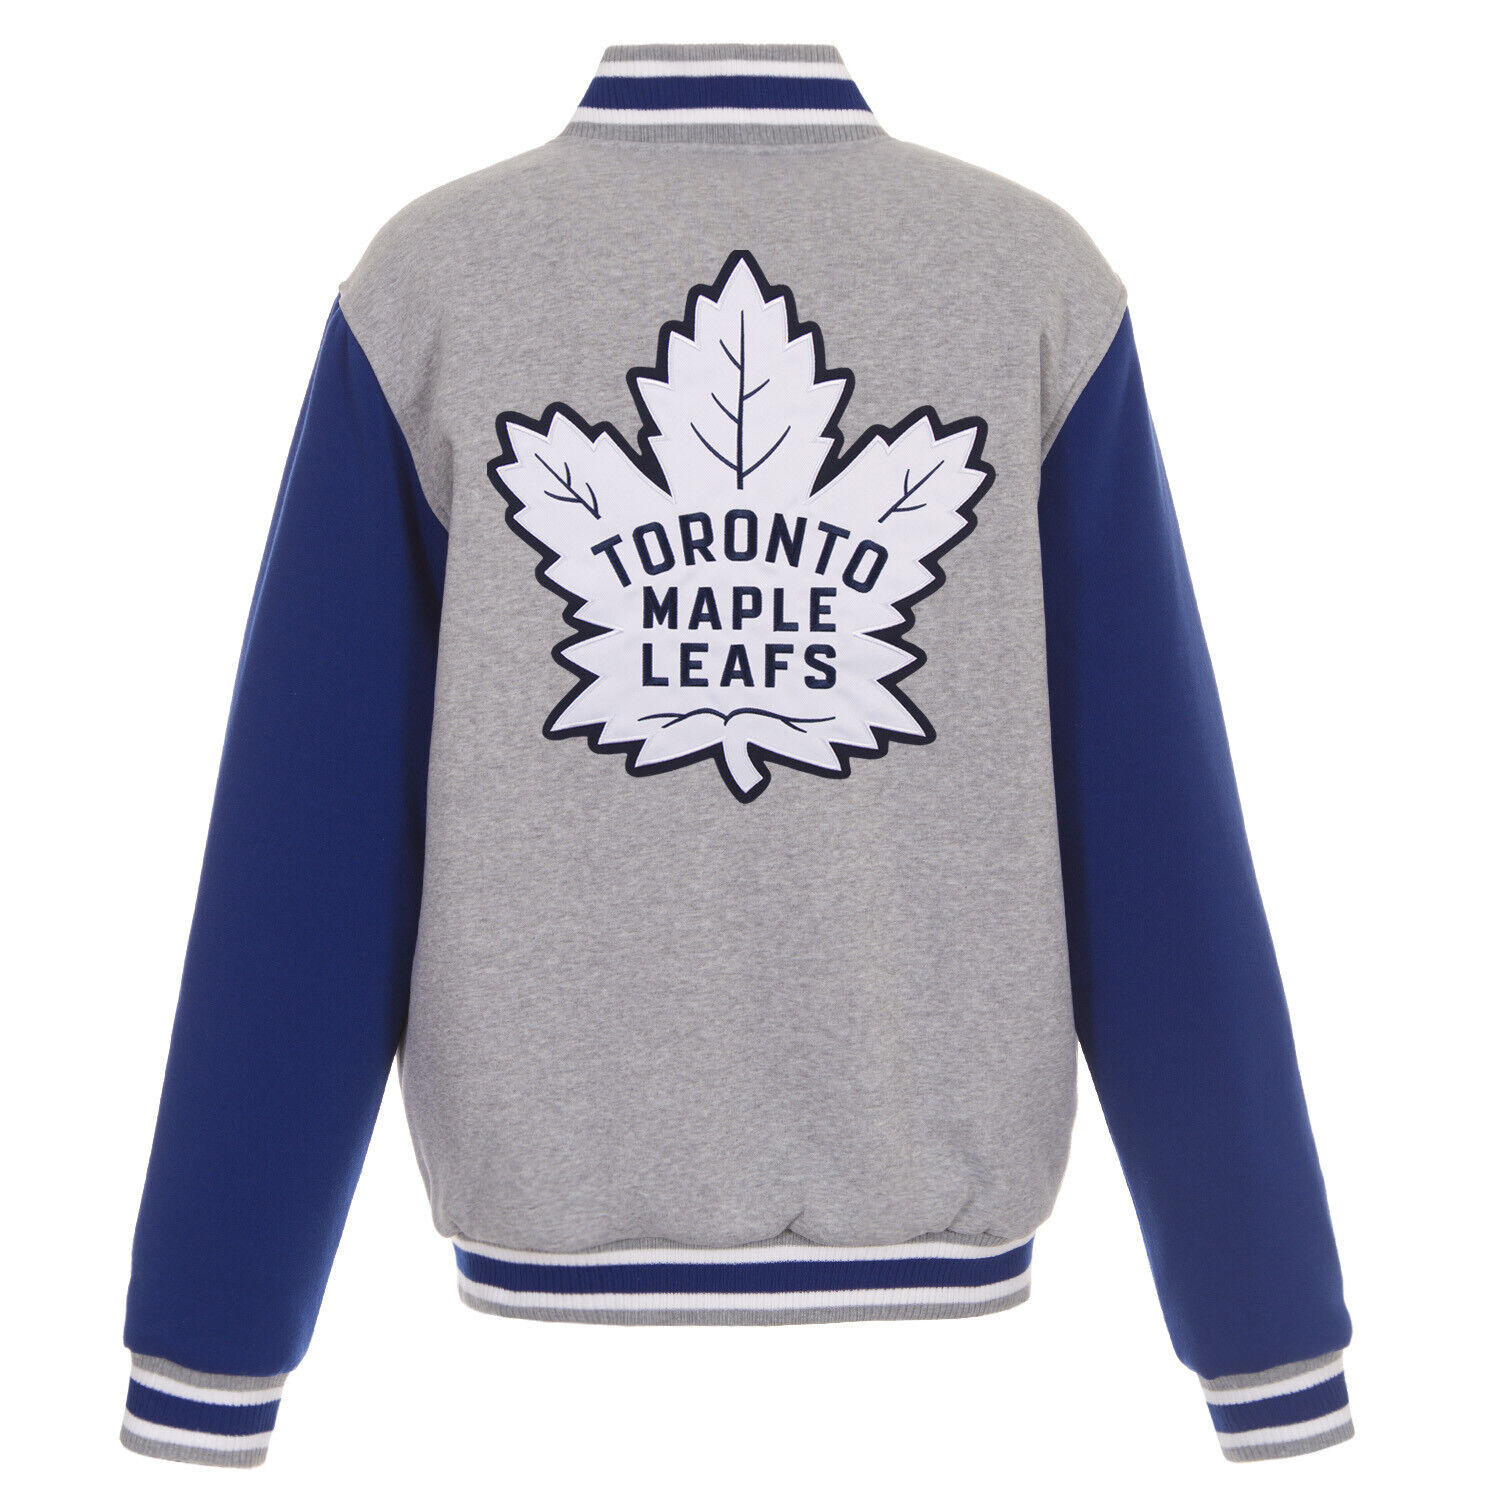 Primary image for NHL Toronto Maple Leafs Reversible Full Snap Fleece Jacket Embroidered Logos JHD